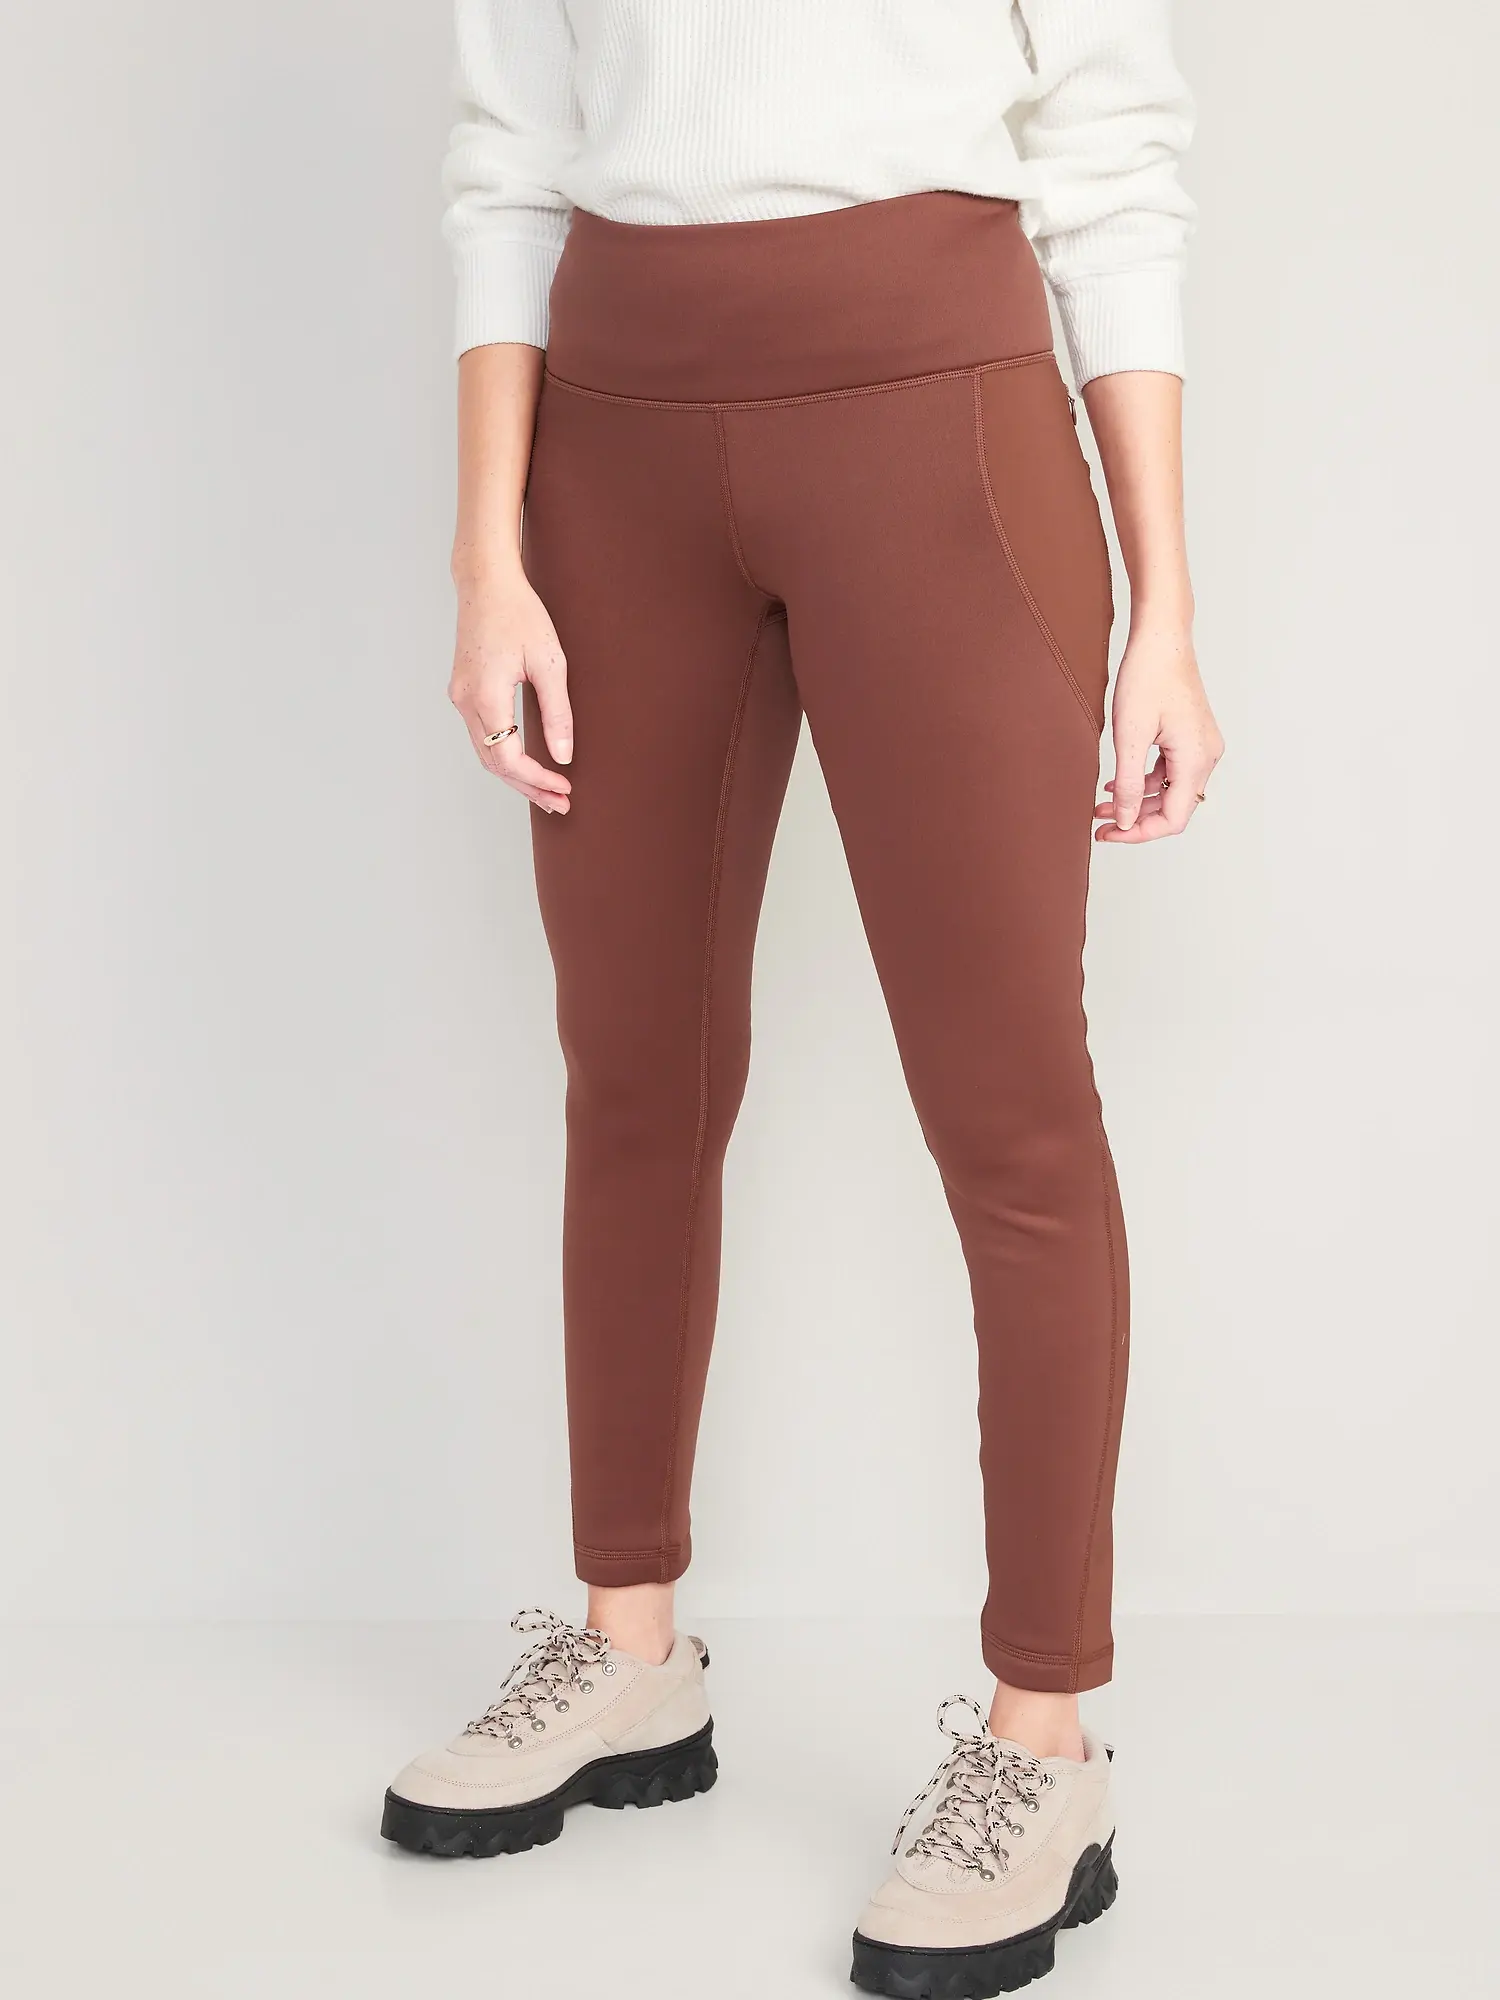 Old Navy High-Waisted UltraCoze Fleece-Lined Leggings for Women brown. 1